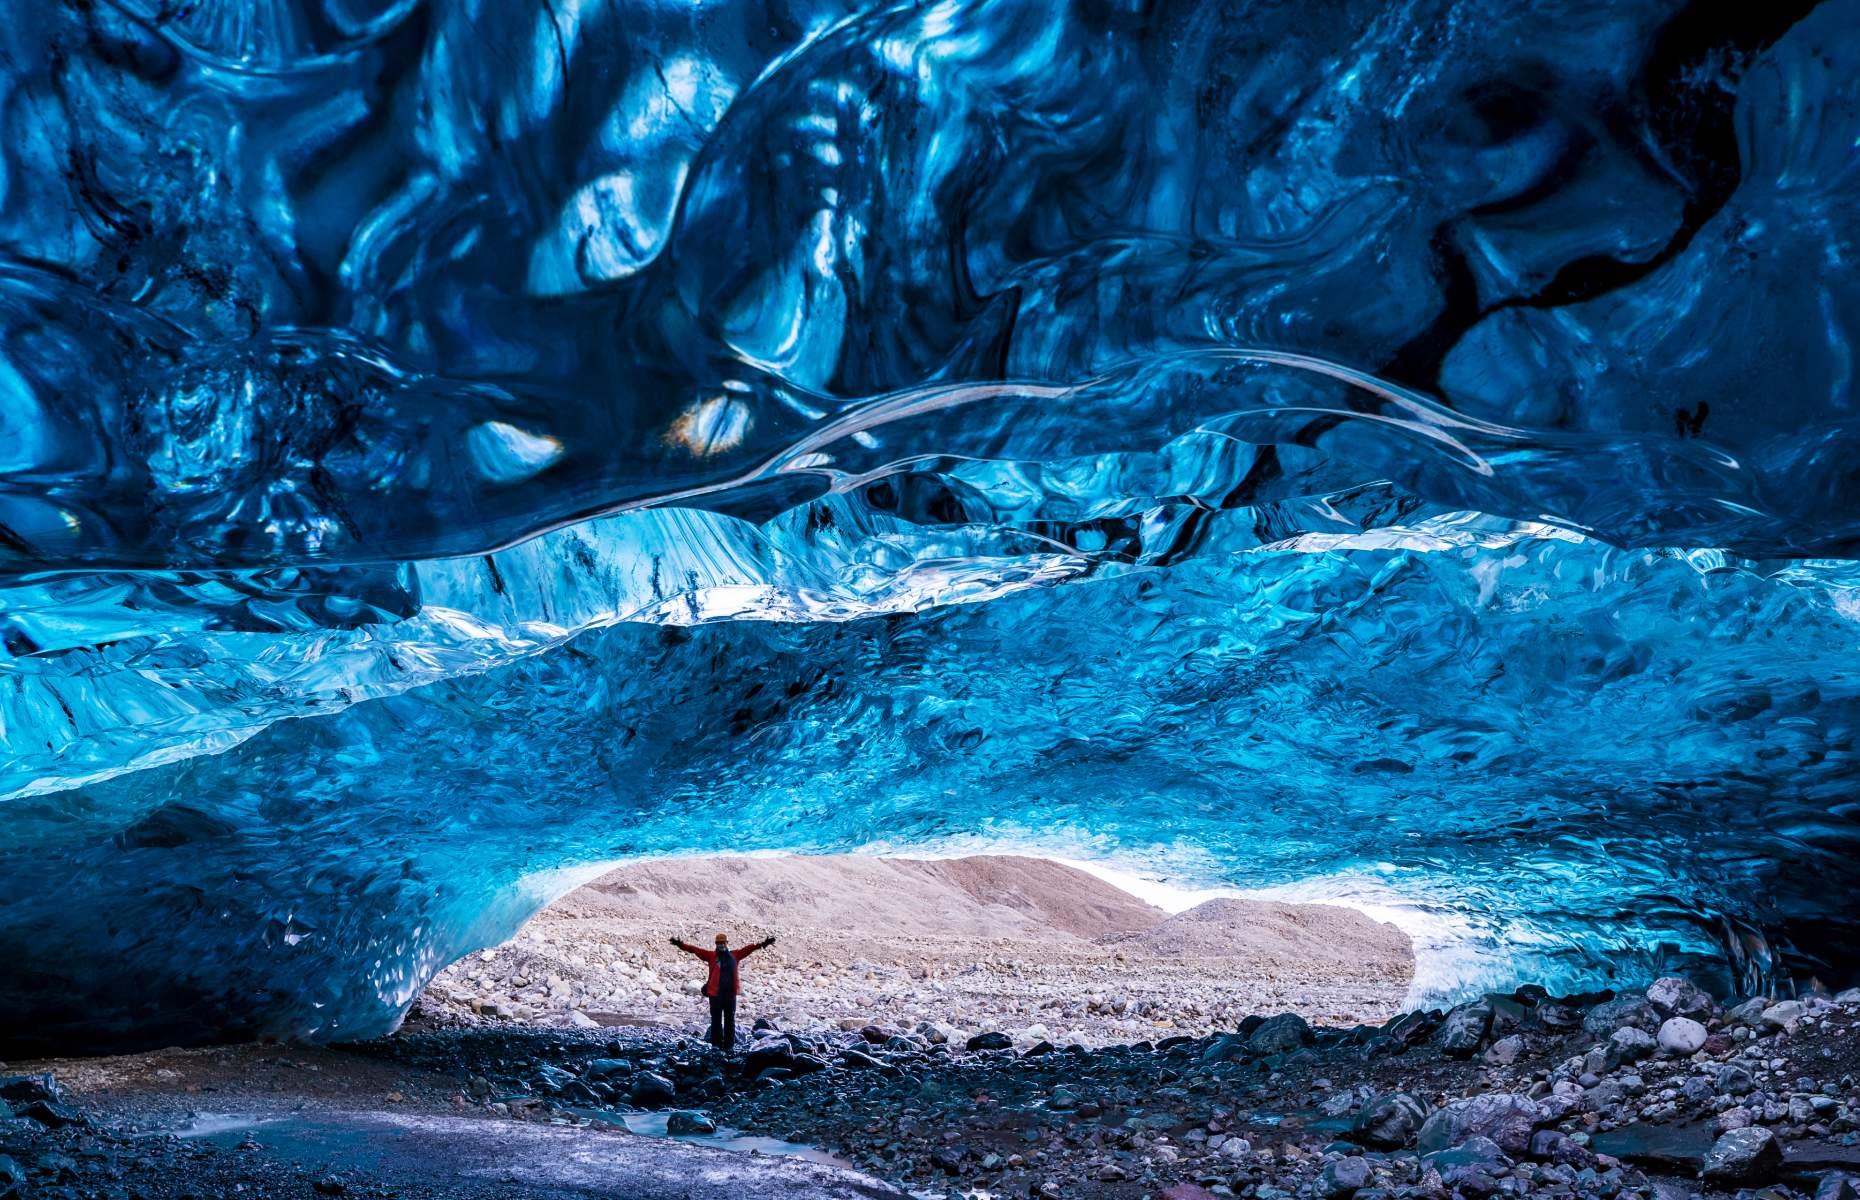 <p>A result of the geothermal heat that Iceland is famous for, the Vatnajökull ice caves are a spectacle that wouldn't look out of place on a film set. Each summer, new crystal blue ice caves are formed in Europe's largest glacier and in the winter months they can be safely explored.</p>  <p><strong><a href="http://www.loveexploring.com/galleries/65382/where-to-go-in-iceland-beyond-the-golden-circle?page=1">Get off the tourist trail in Iceland with these tips</a></strong></p>